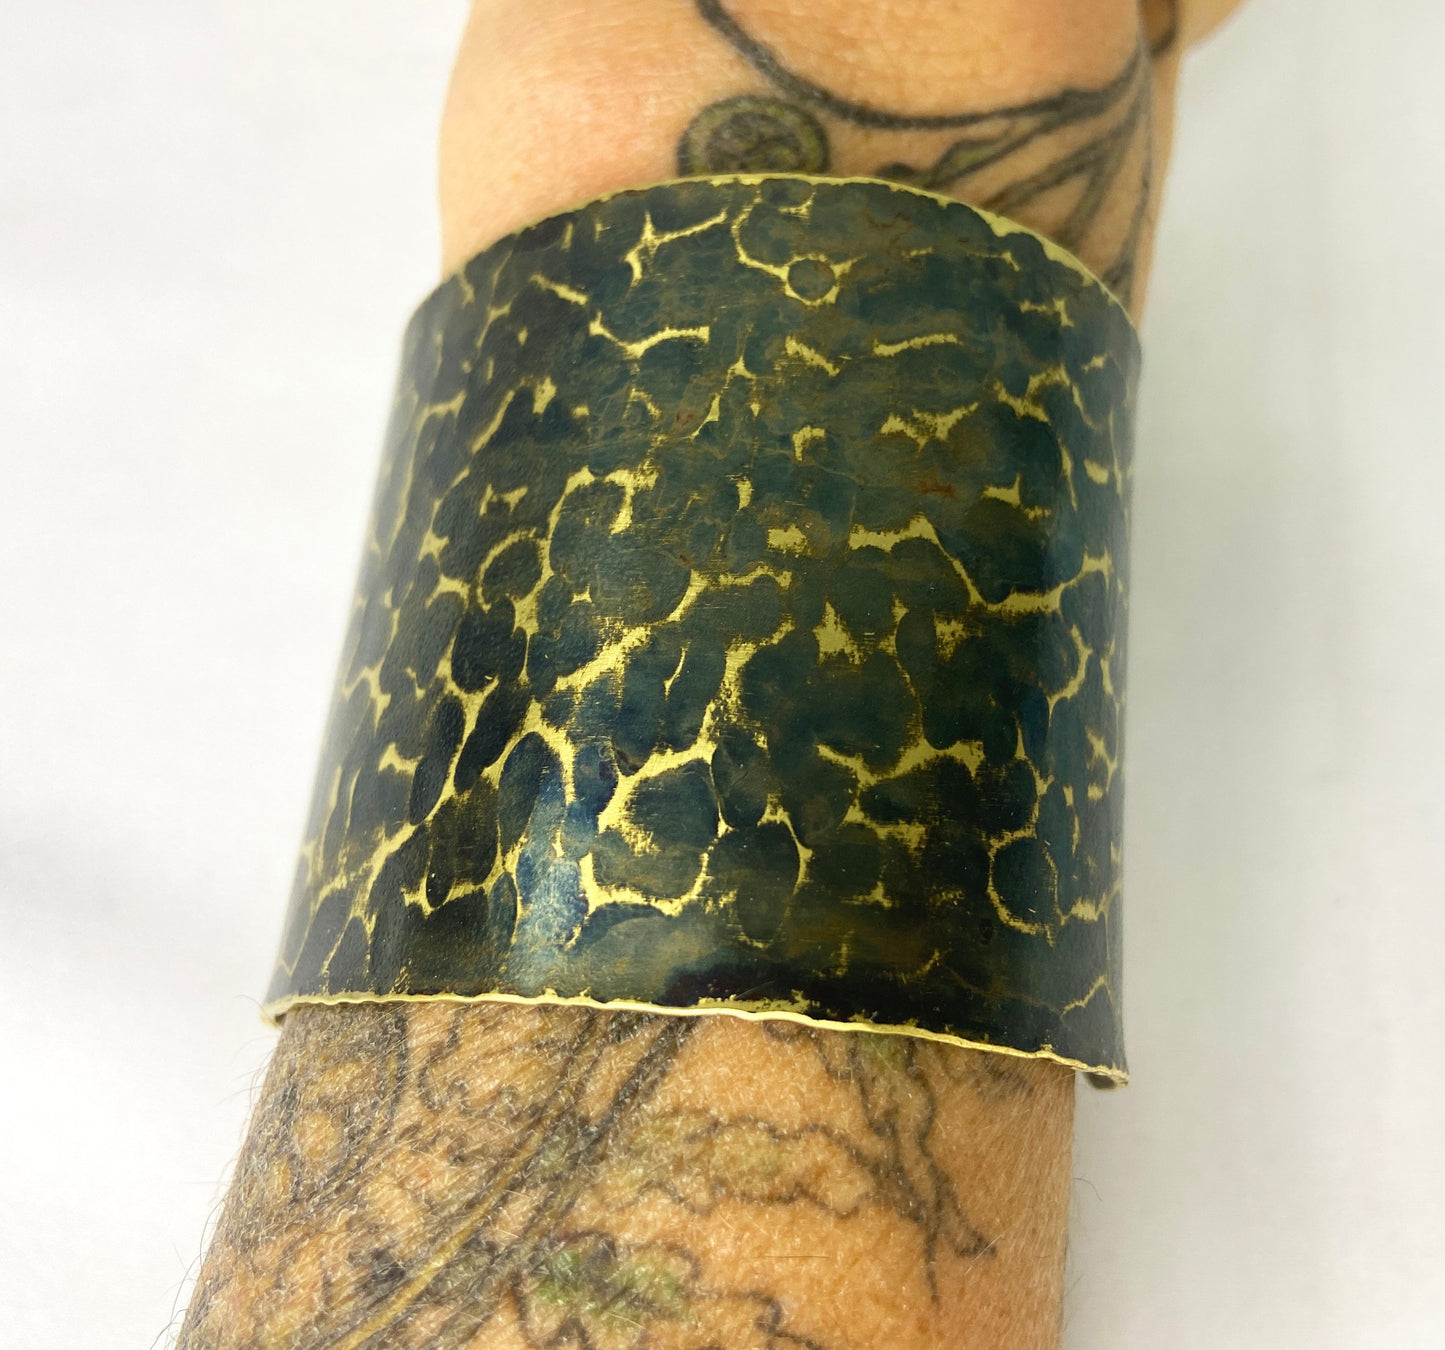 Hammered Brass Cuff with Torch Blue Patina